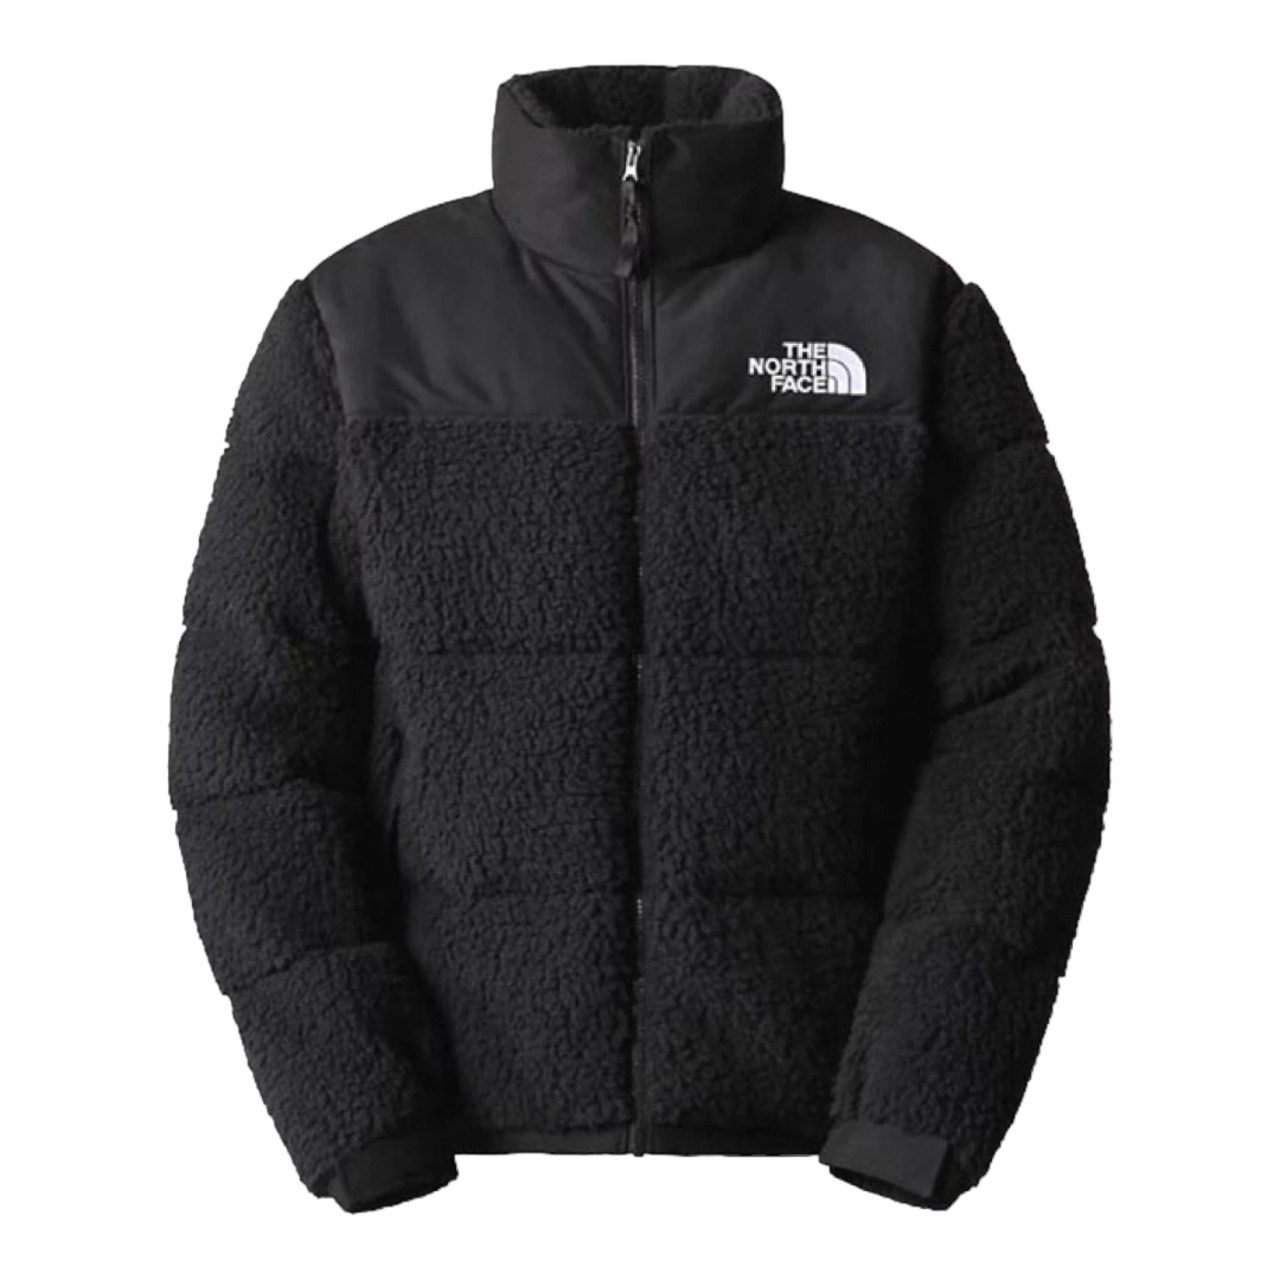 【THE NORTH FACE】The North Face High Pile Nuptse Jacket【ノースフェイス】